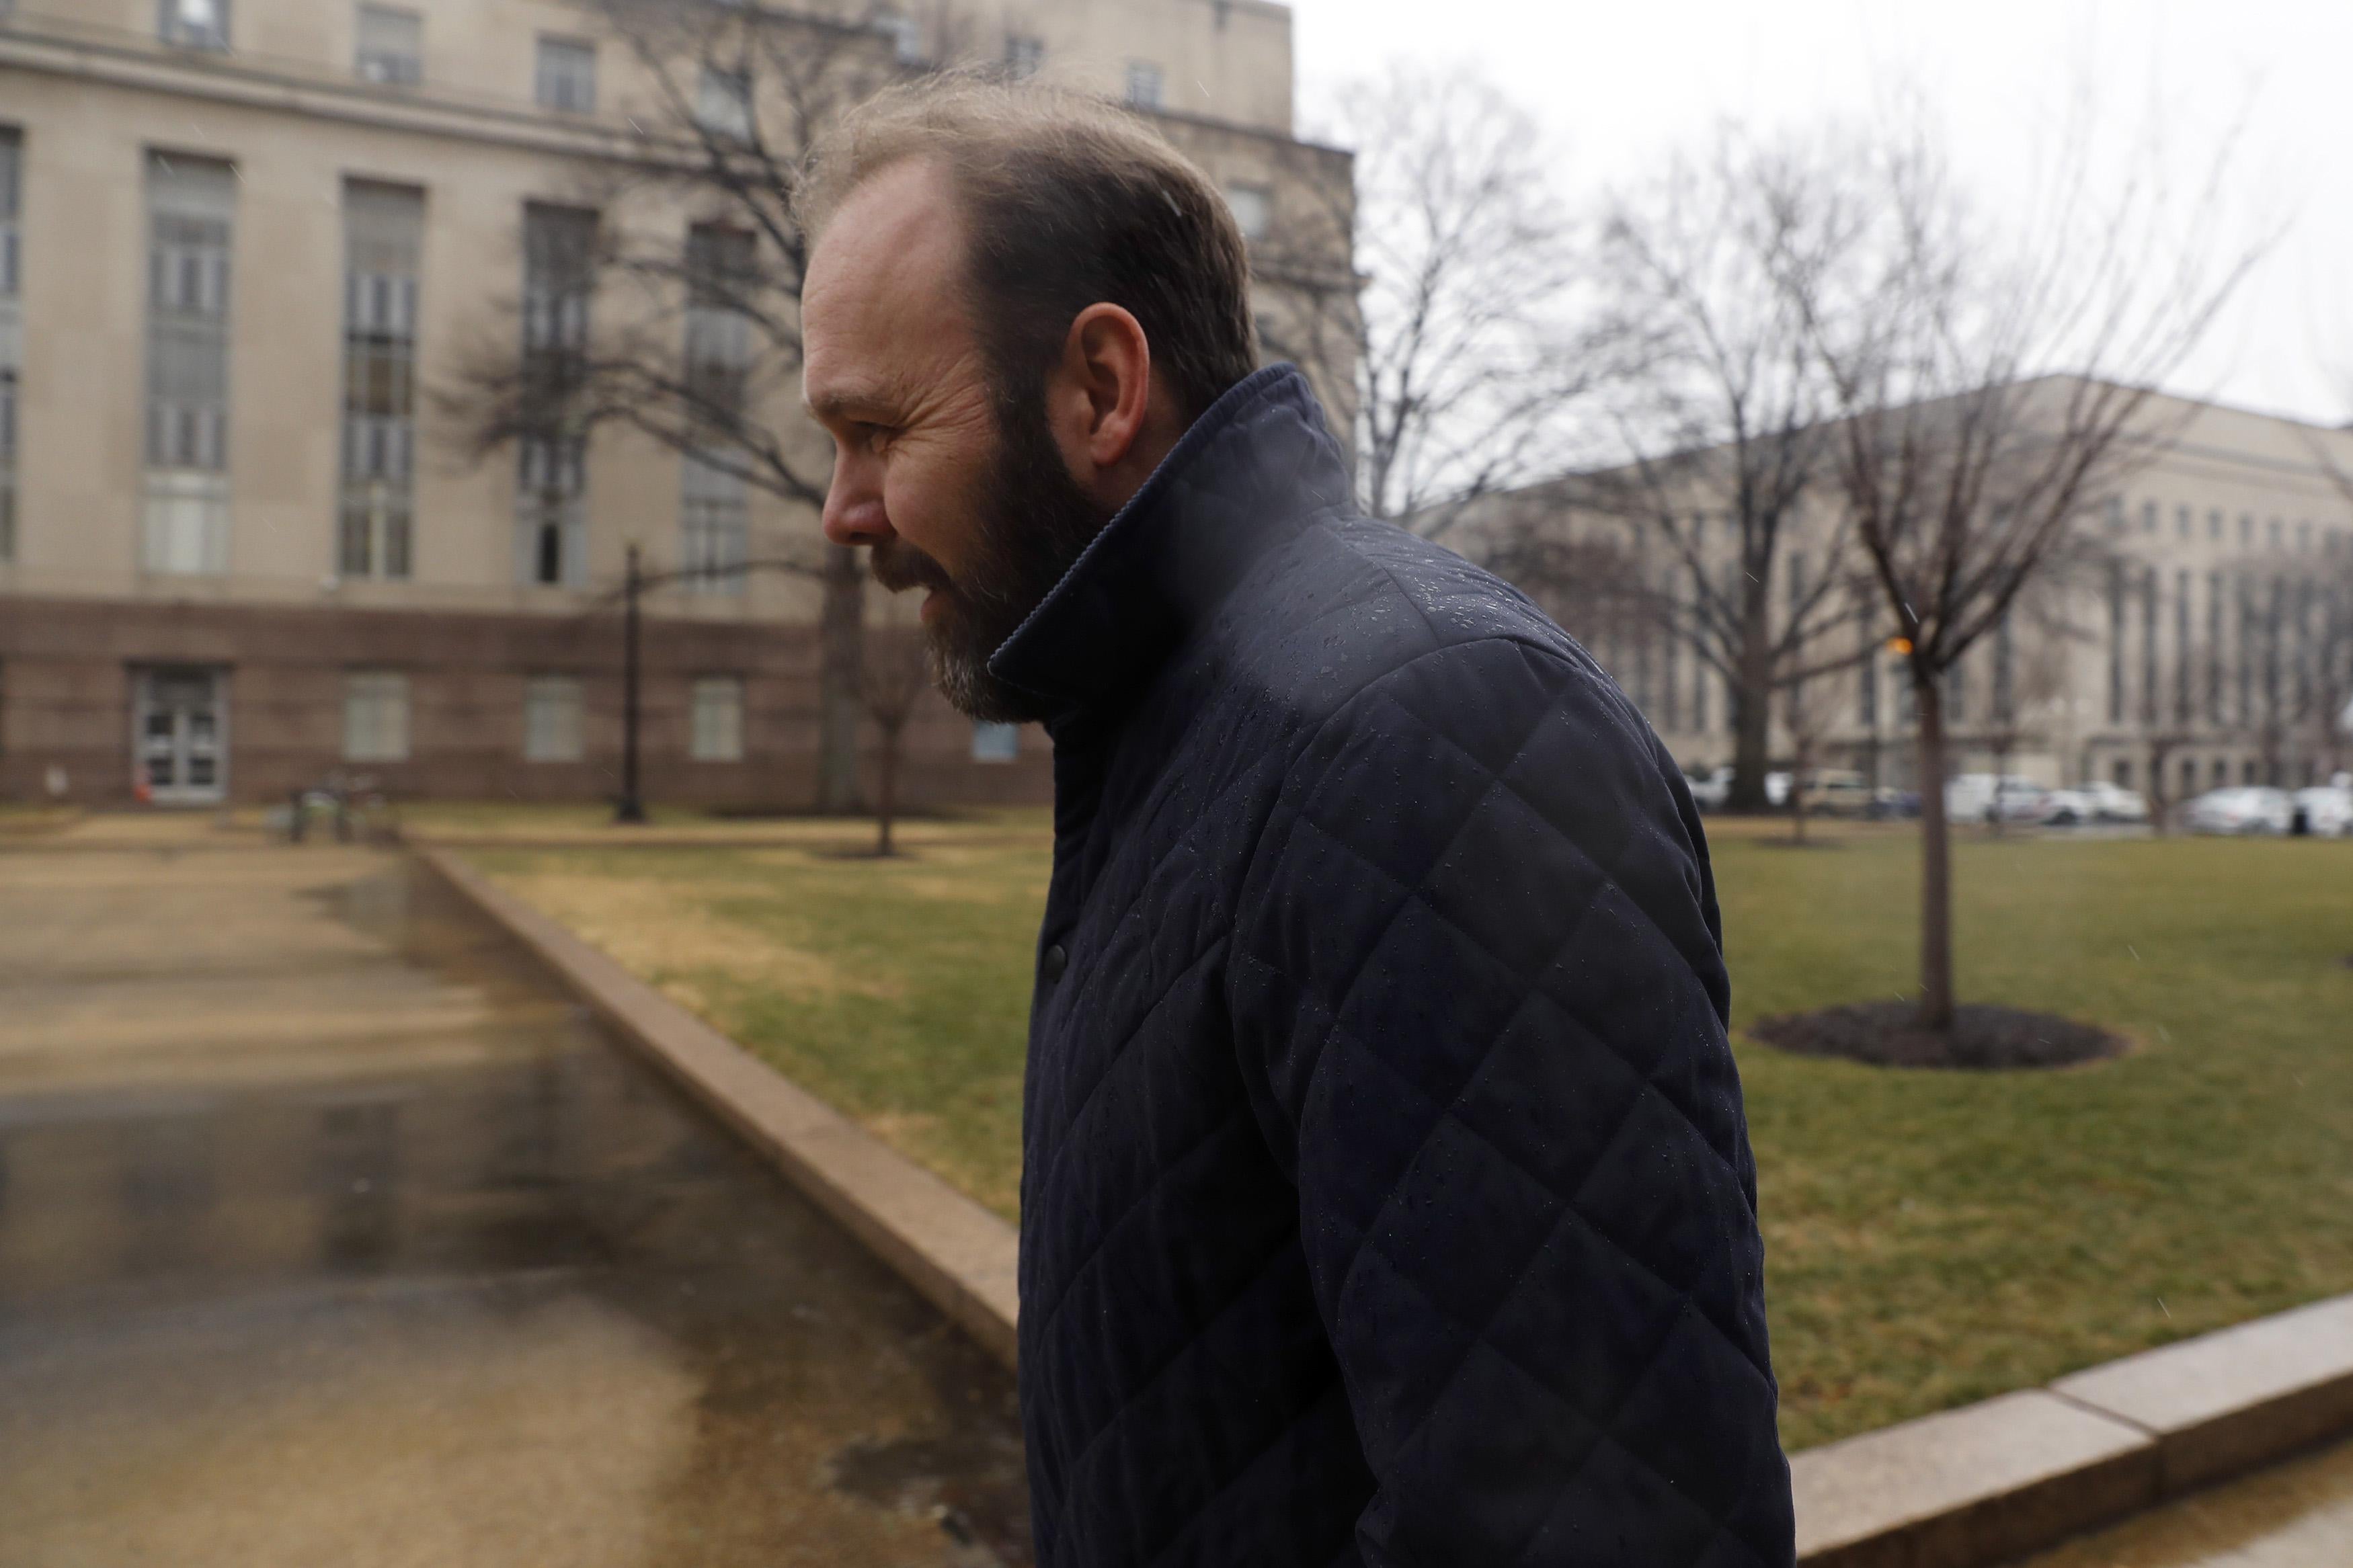 Former Trump Aide Rick Gates attends a hearing on his fraud, conspiracy and money-laundering at the E. Barrett Prettyman United States Courthouse on February 7, 2018 in Washington, DC.